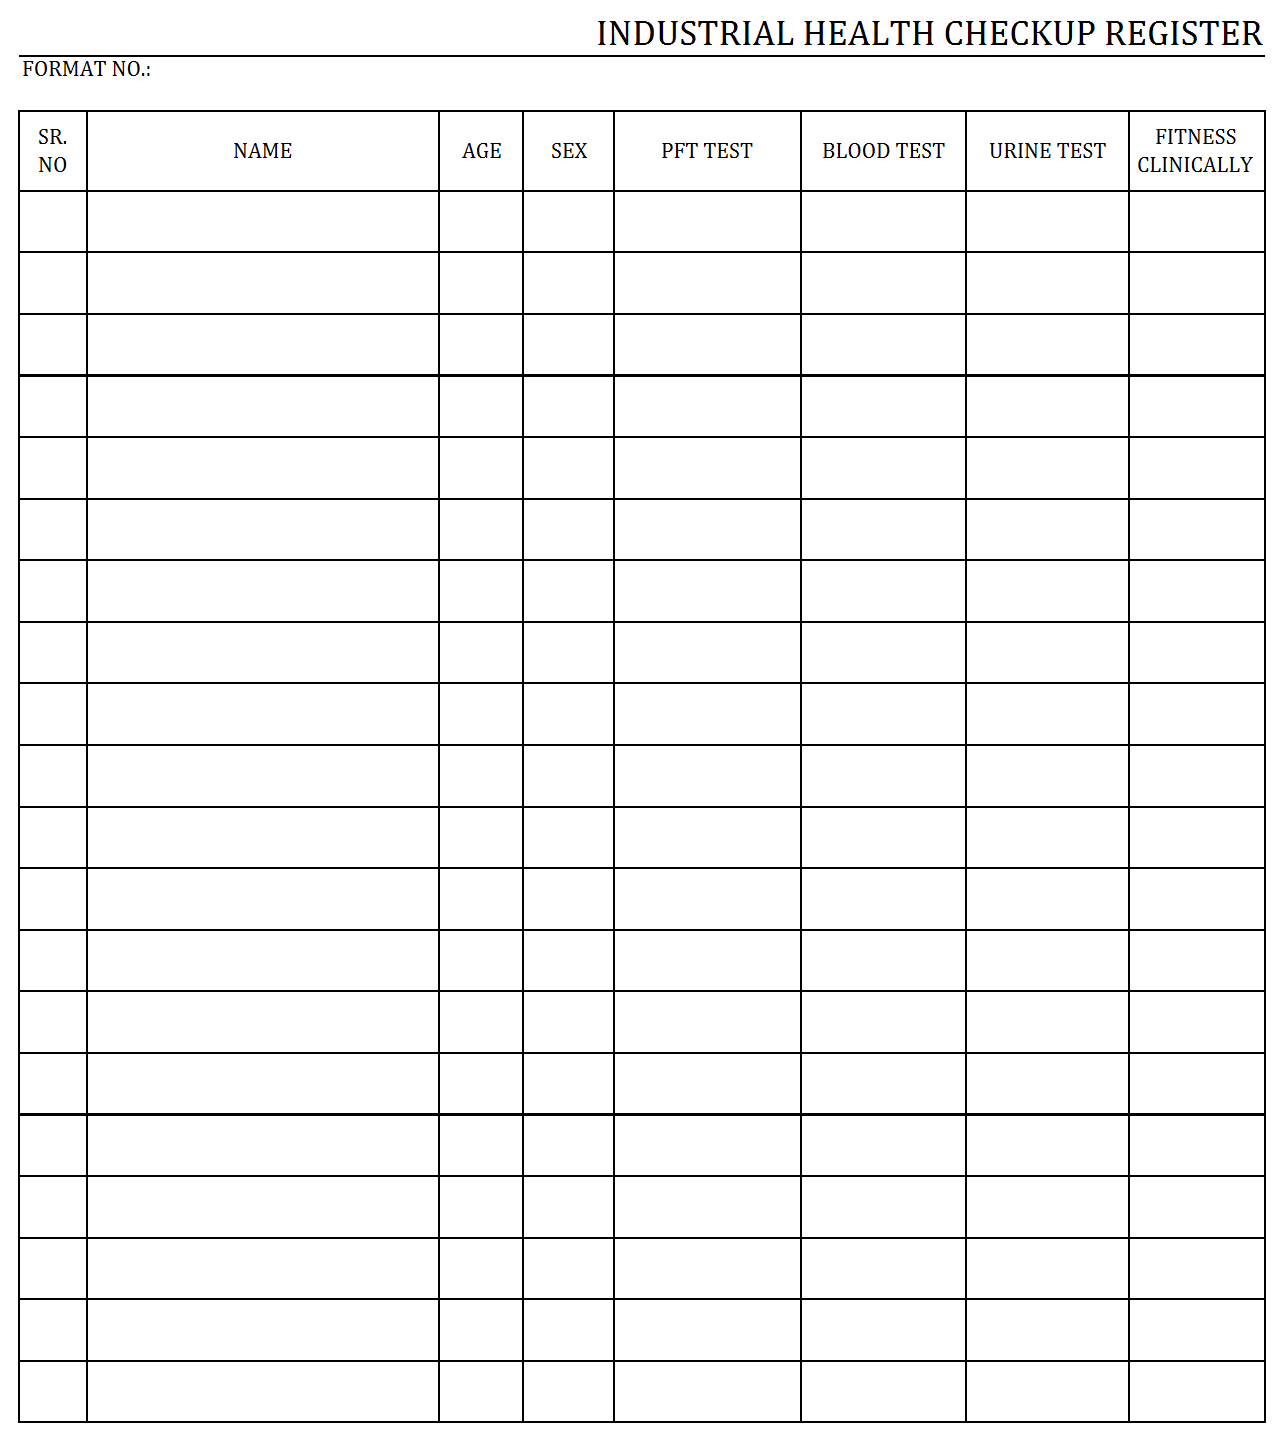 Industrial health checkup register - Throughout Health Check Report Template